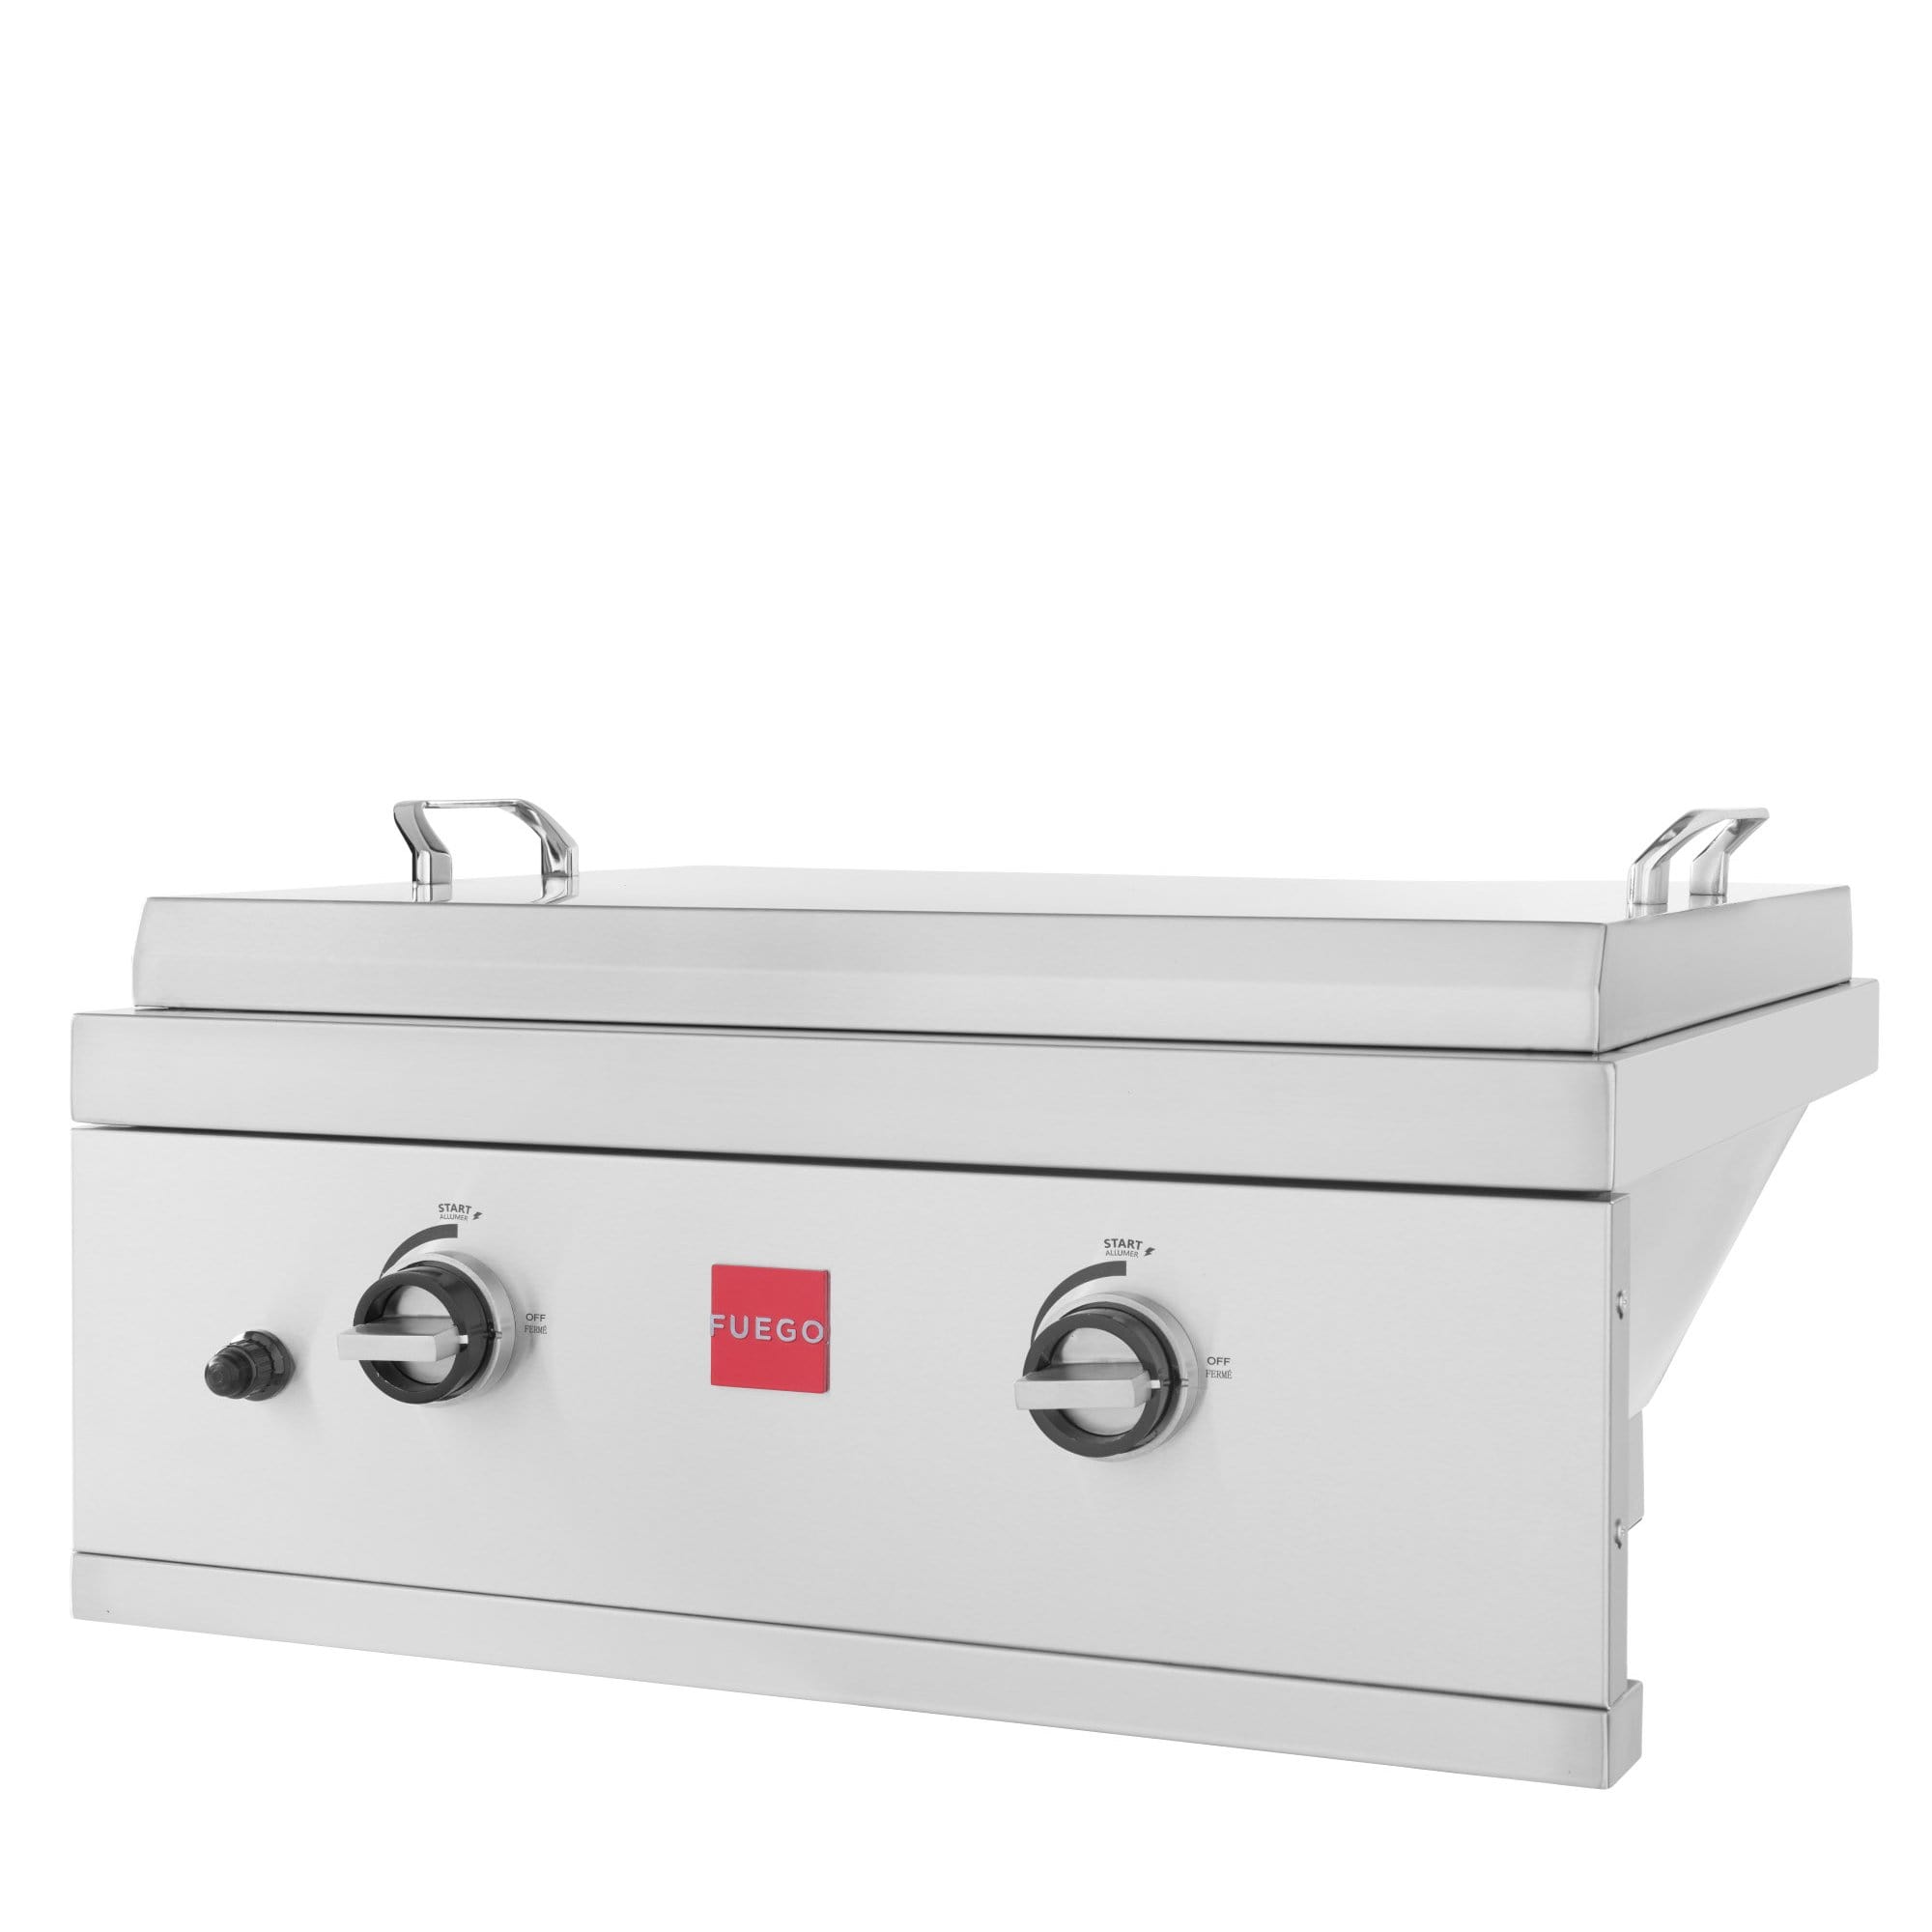 https://cdn.shopify.com/s/files/1/0223/8188/7560/products/fuego-living-freestanding-gas-griddle-fuego-f27s-griddle-all-304ss-gas-griddle-31092979761308_2000x.jpg?v=1628634335